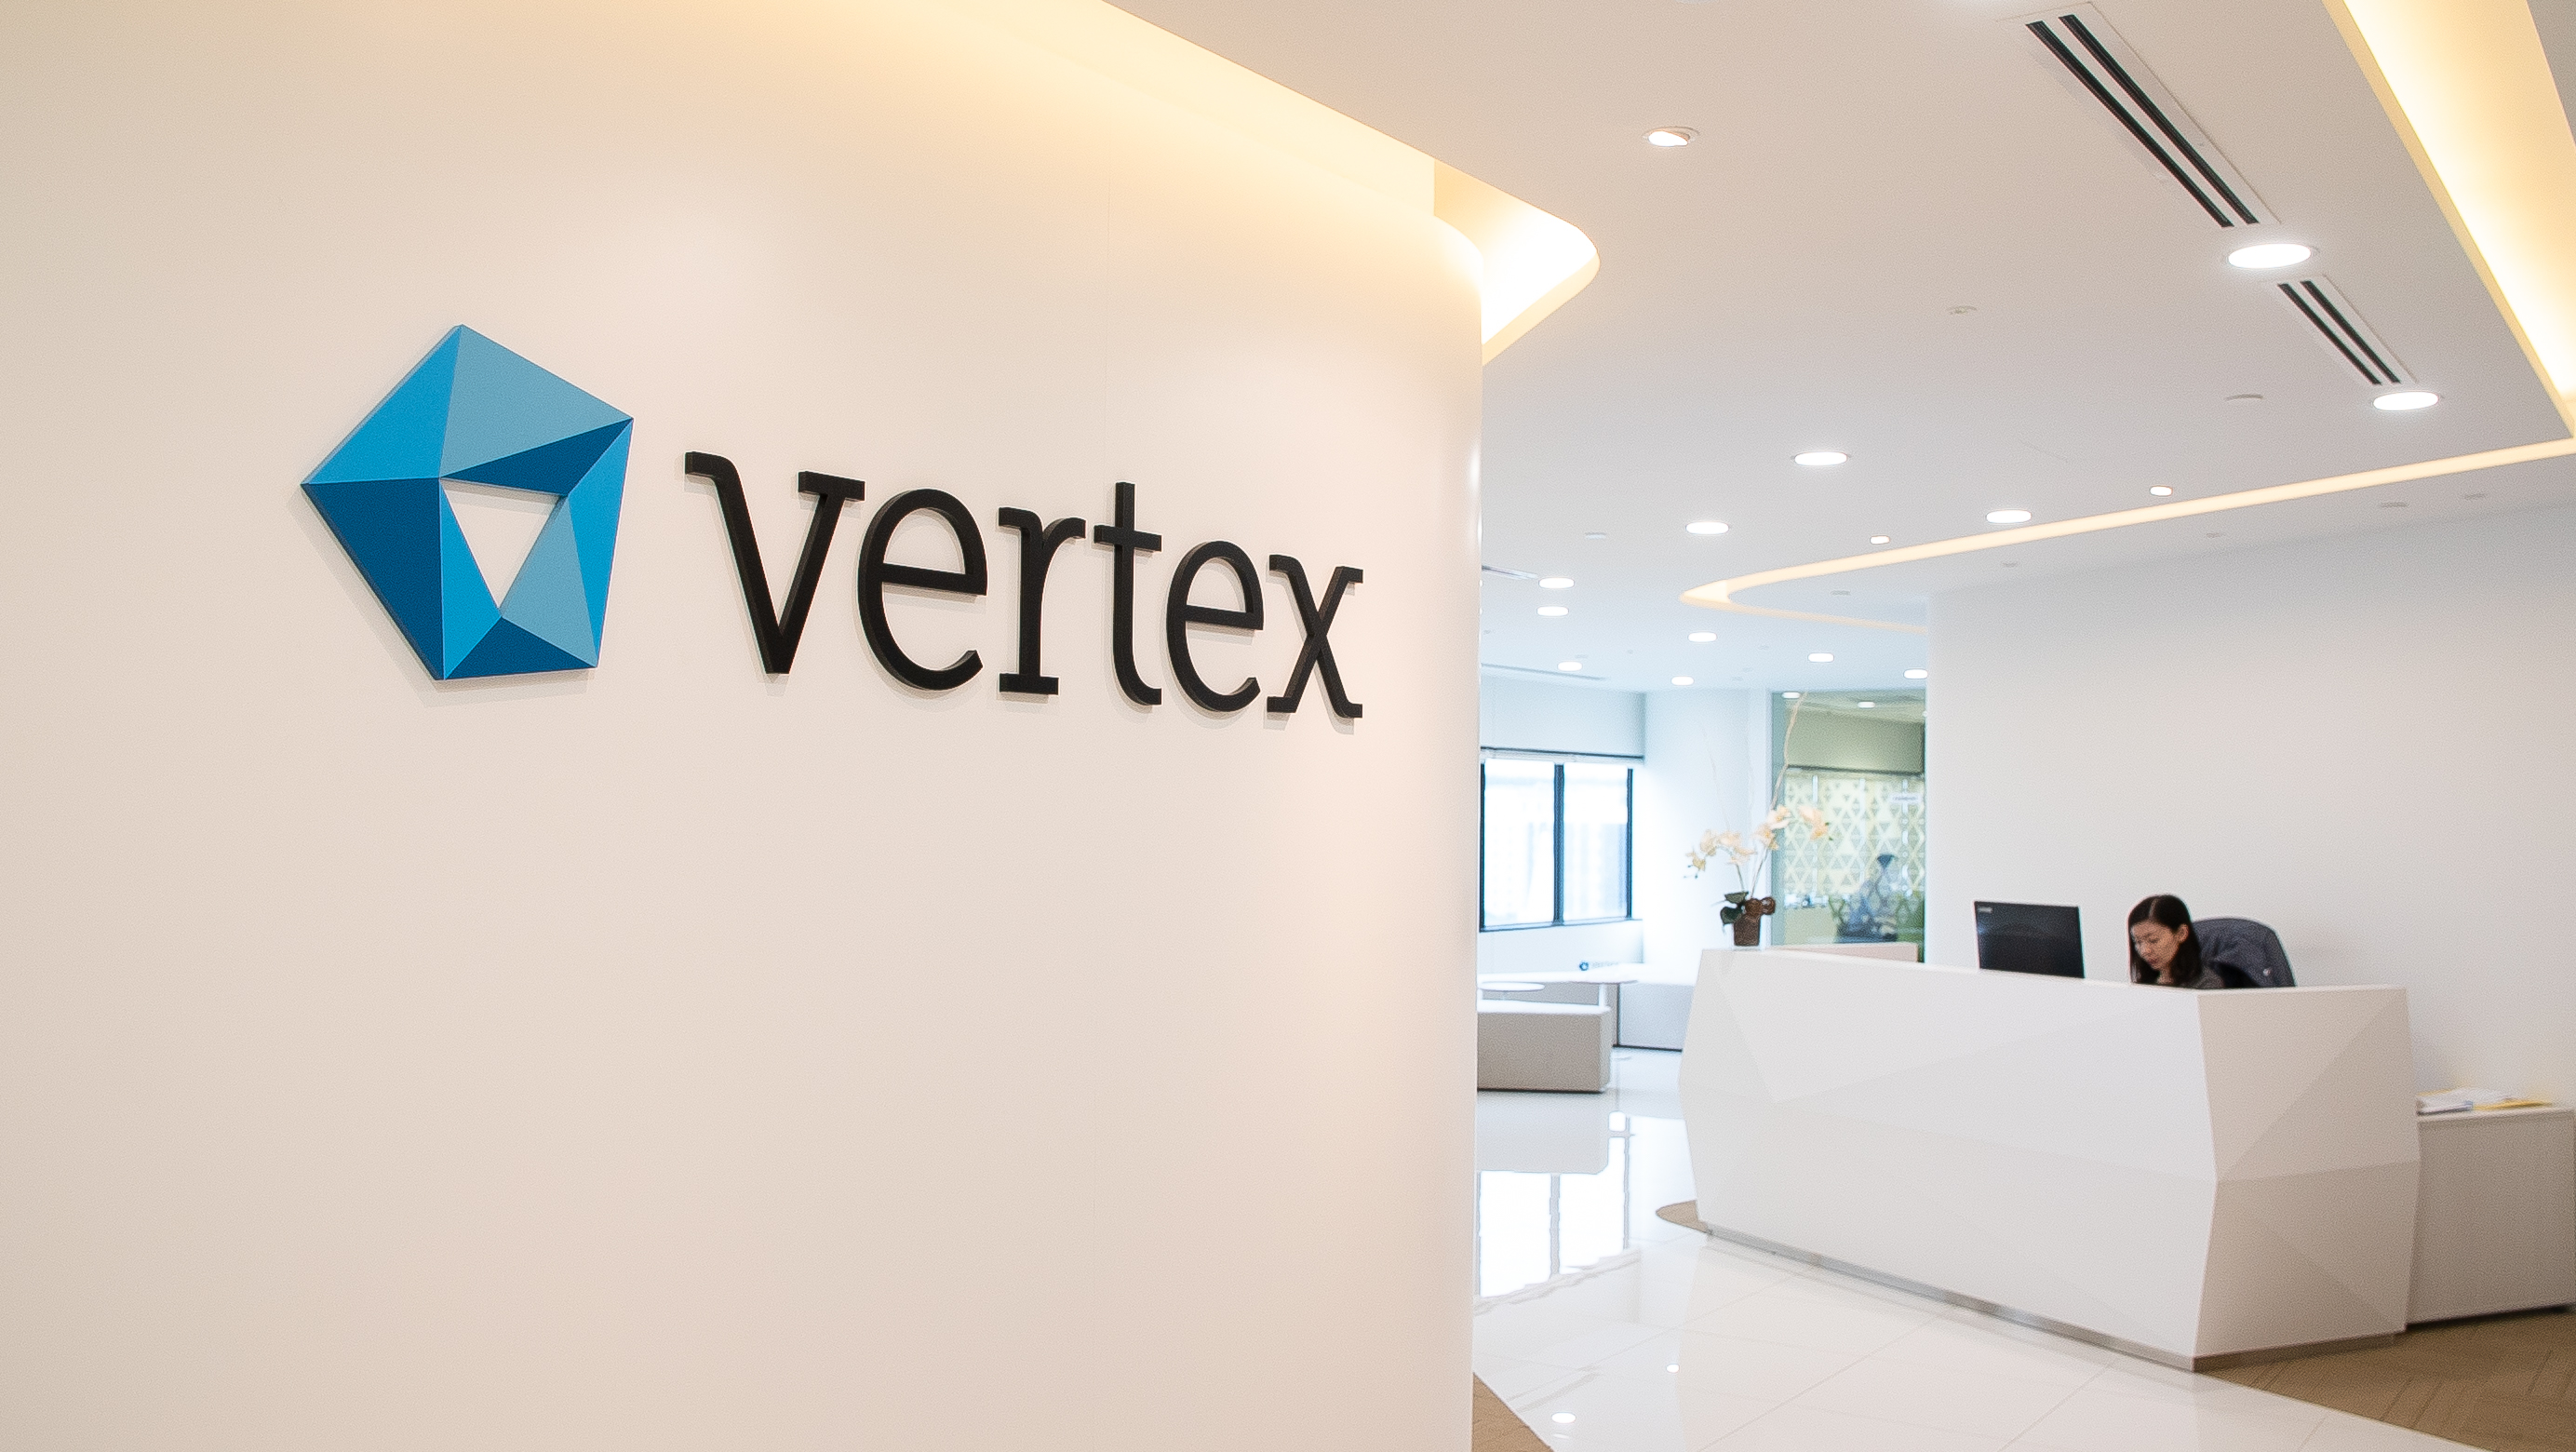 Vertex Ventures targets its next 500 million internet users from India